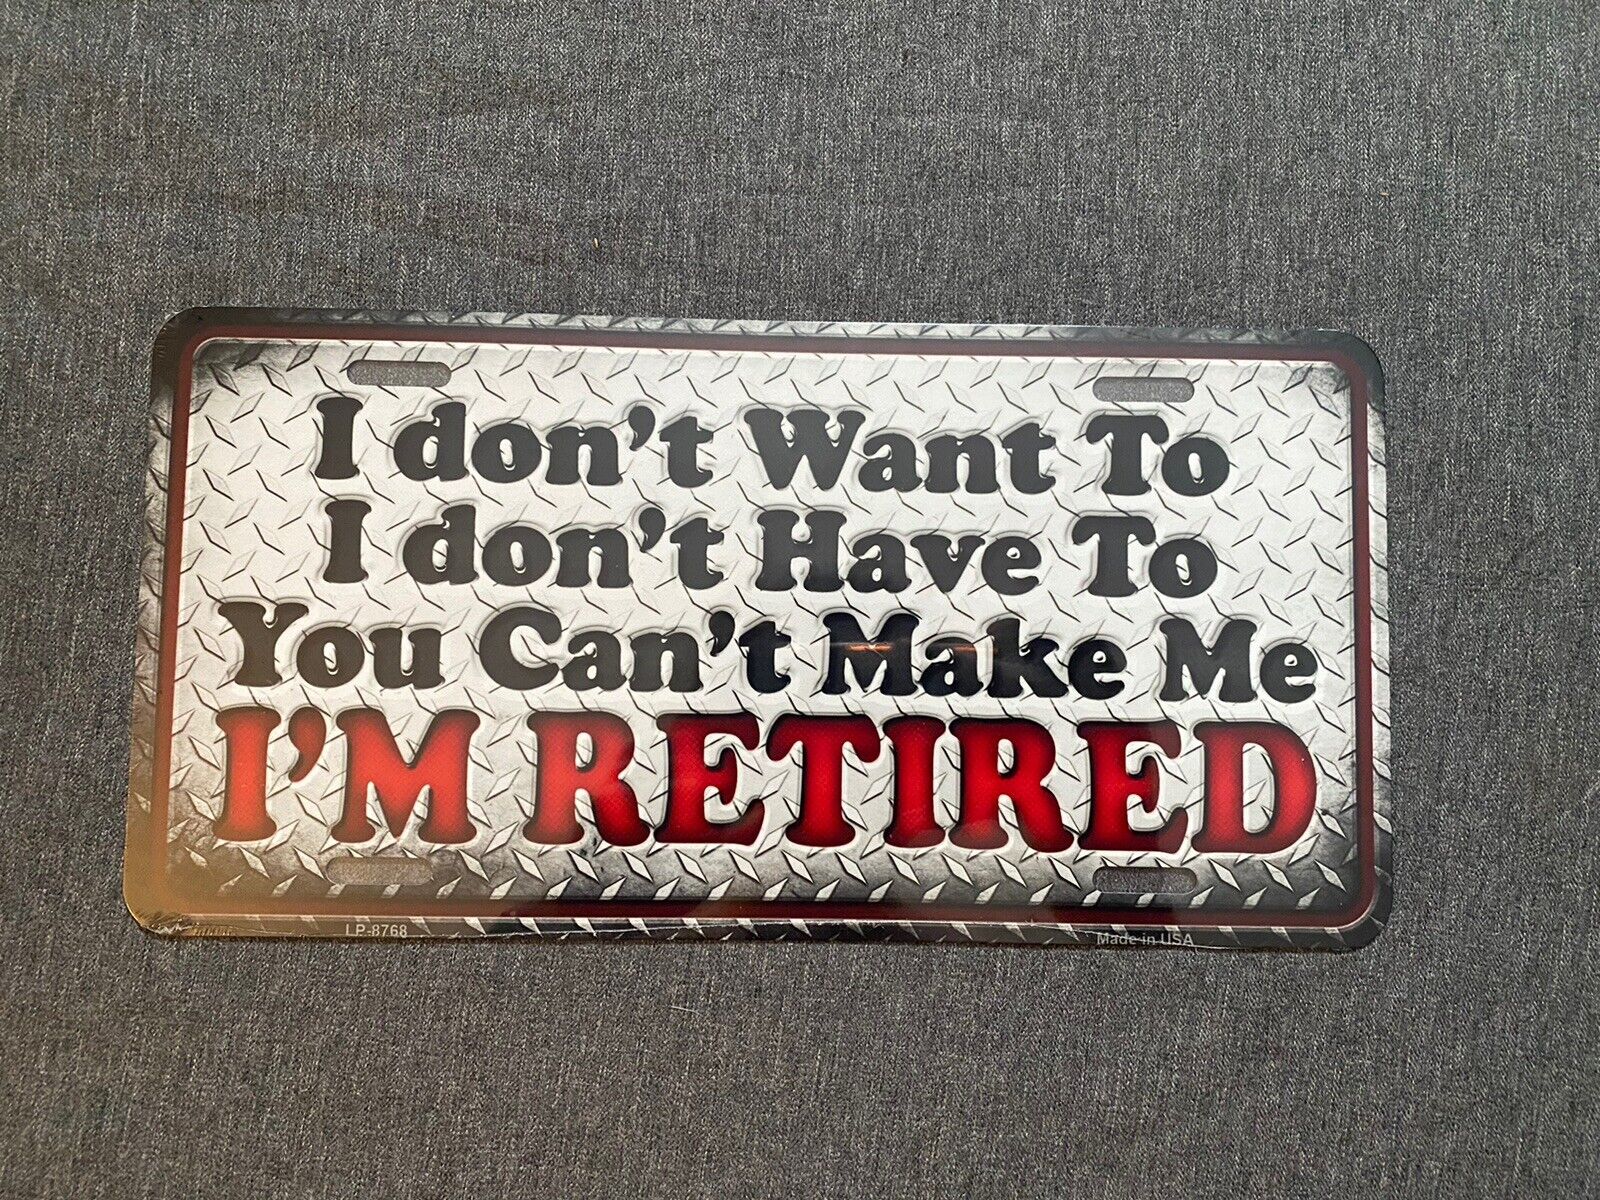 I’m Retired License Plate Aluminum “I Don’t Want To I Don’t Have To”, NEW